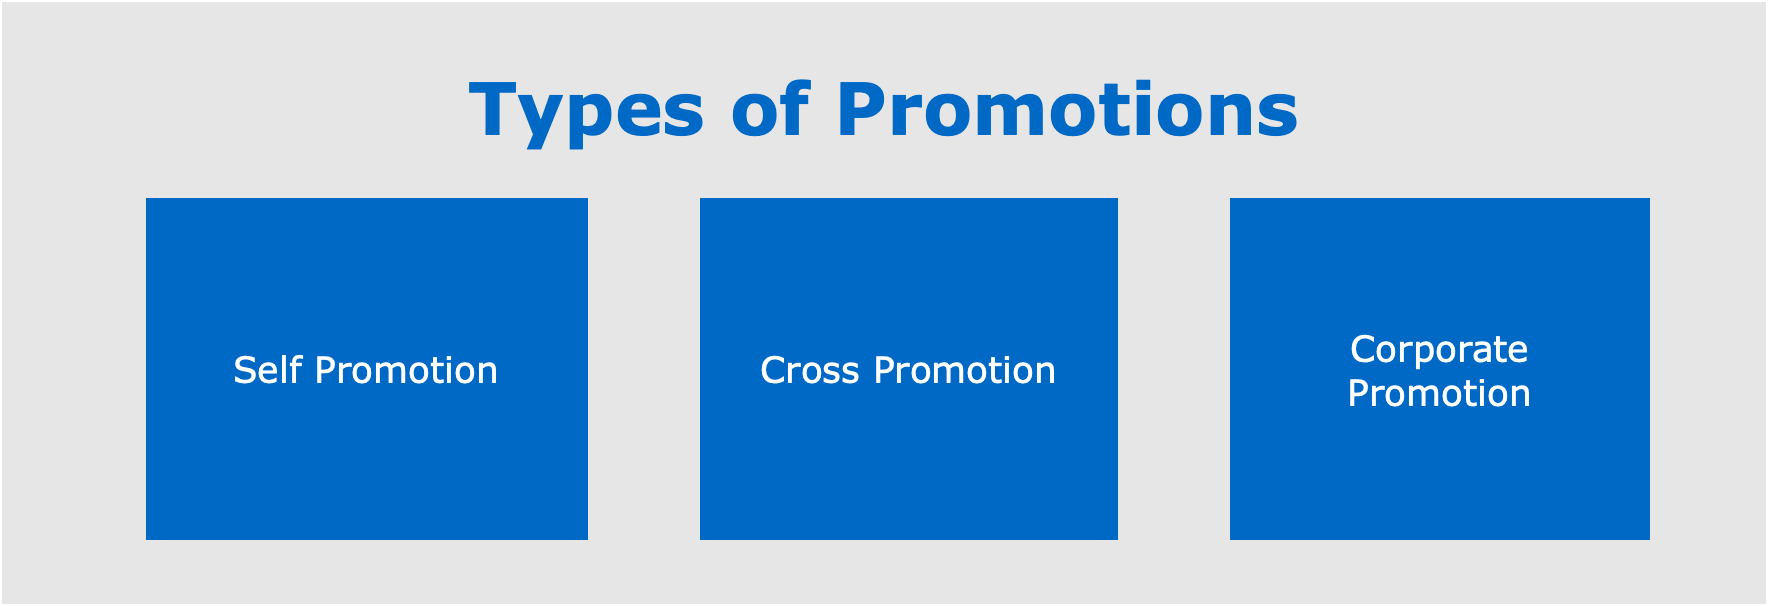 Types of Promotions